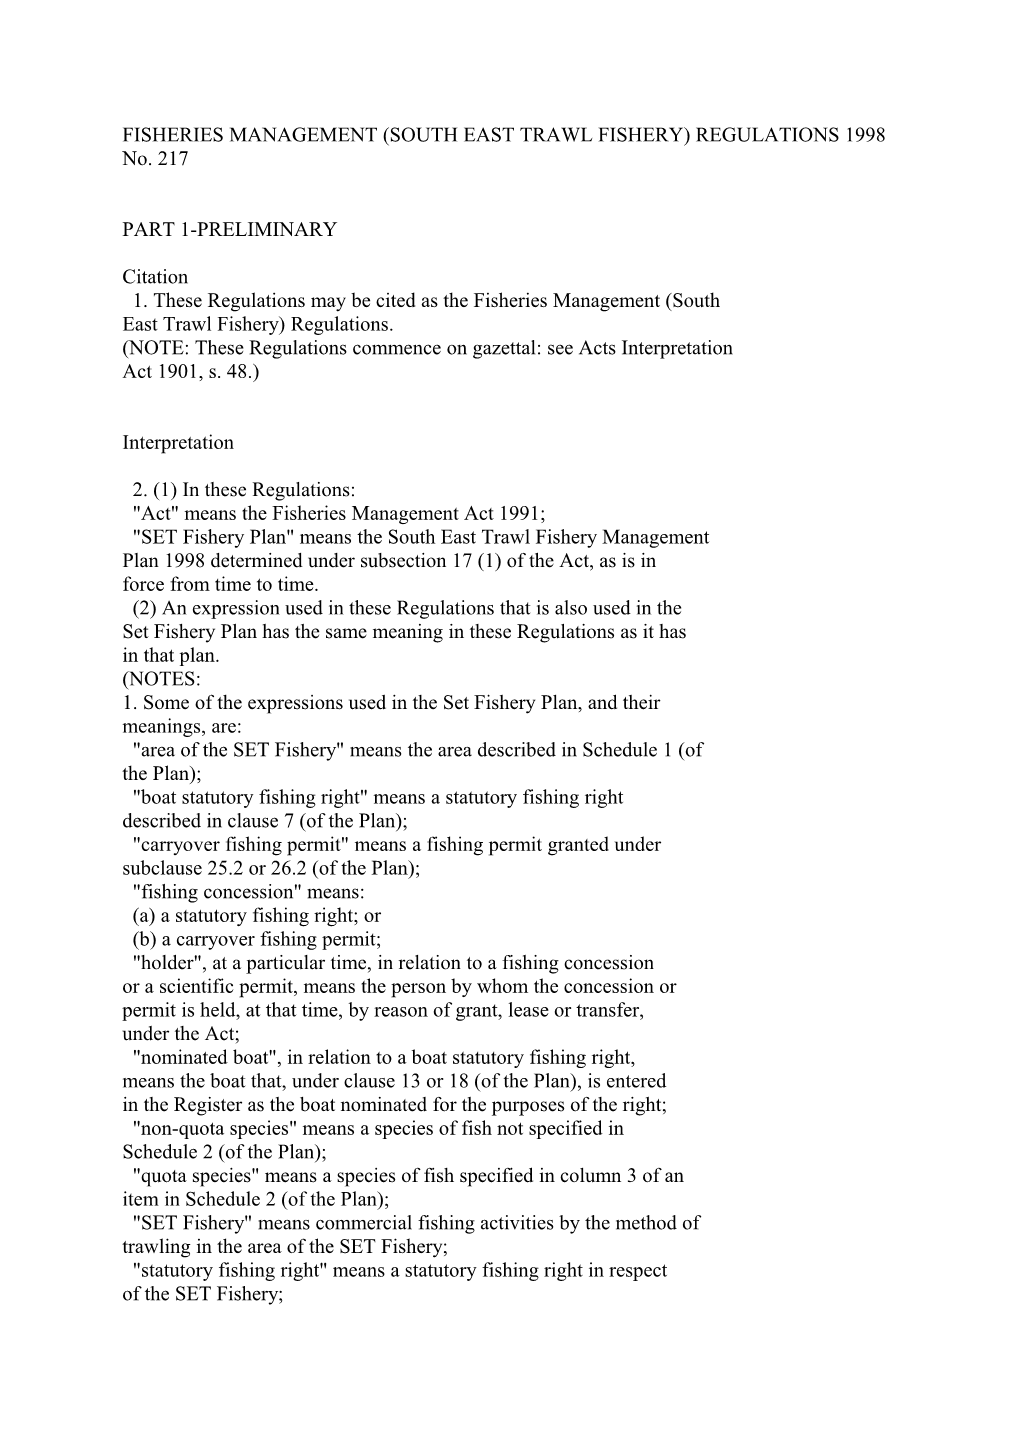 Fisheries Management (South East Trawl Fishery) Regulations 1998